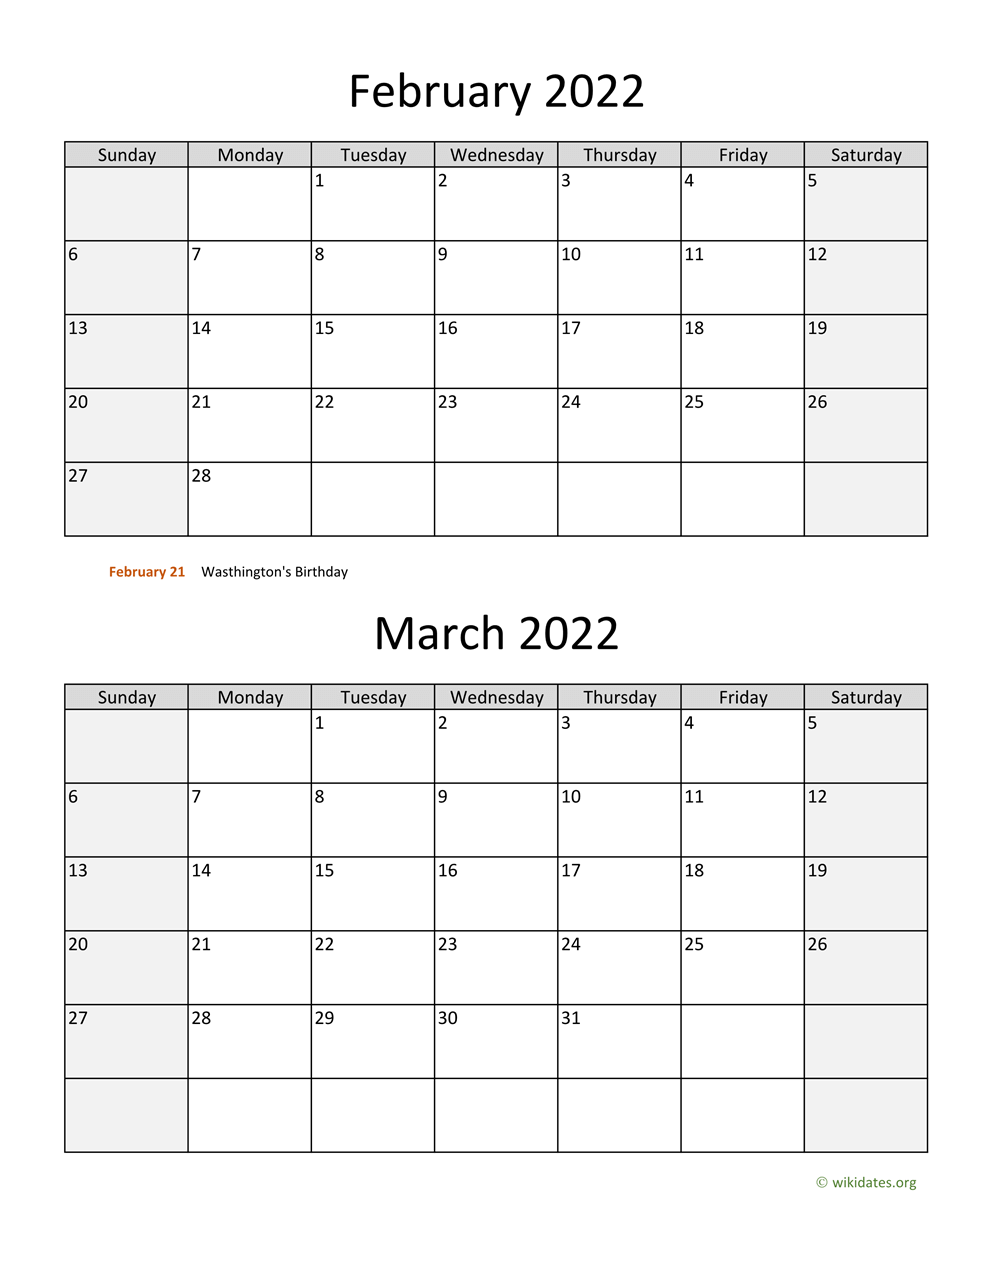 February And March 2022 Calendar Wikidates Org